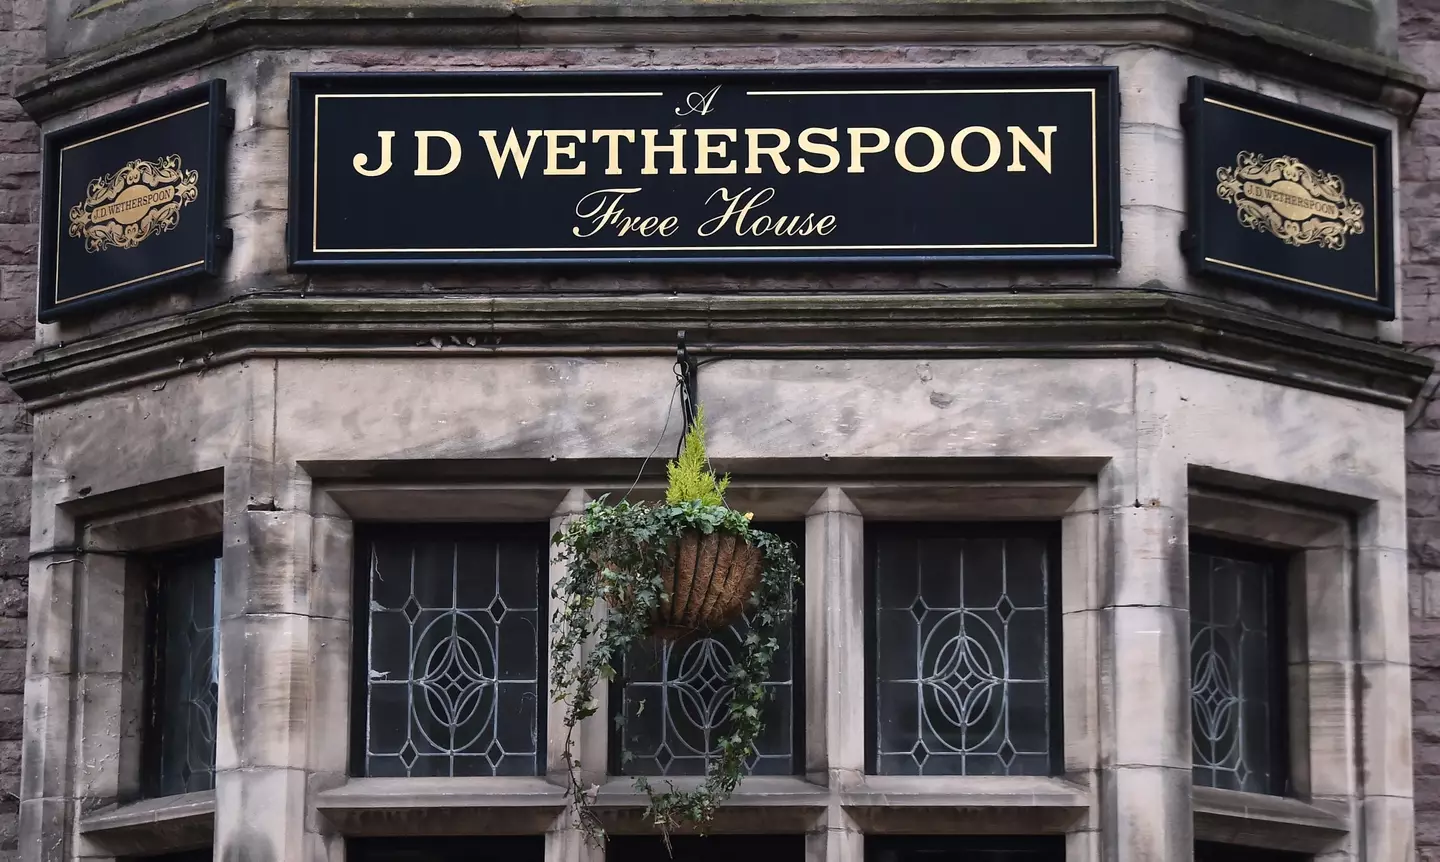 If you're wondering how Wetherspoons can be cheaper than other pubs, there's a few reasons to explain it.